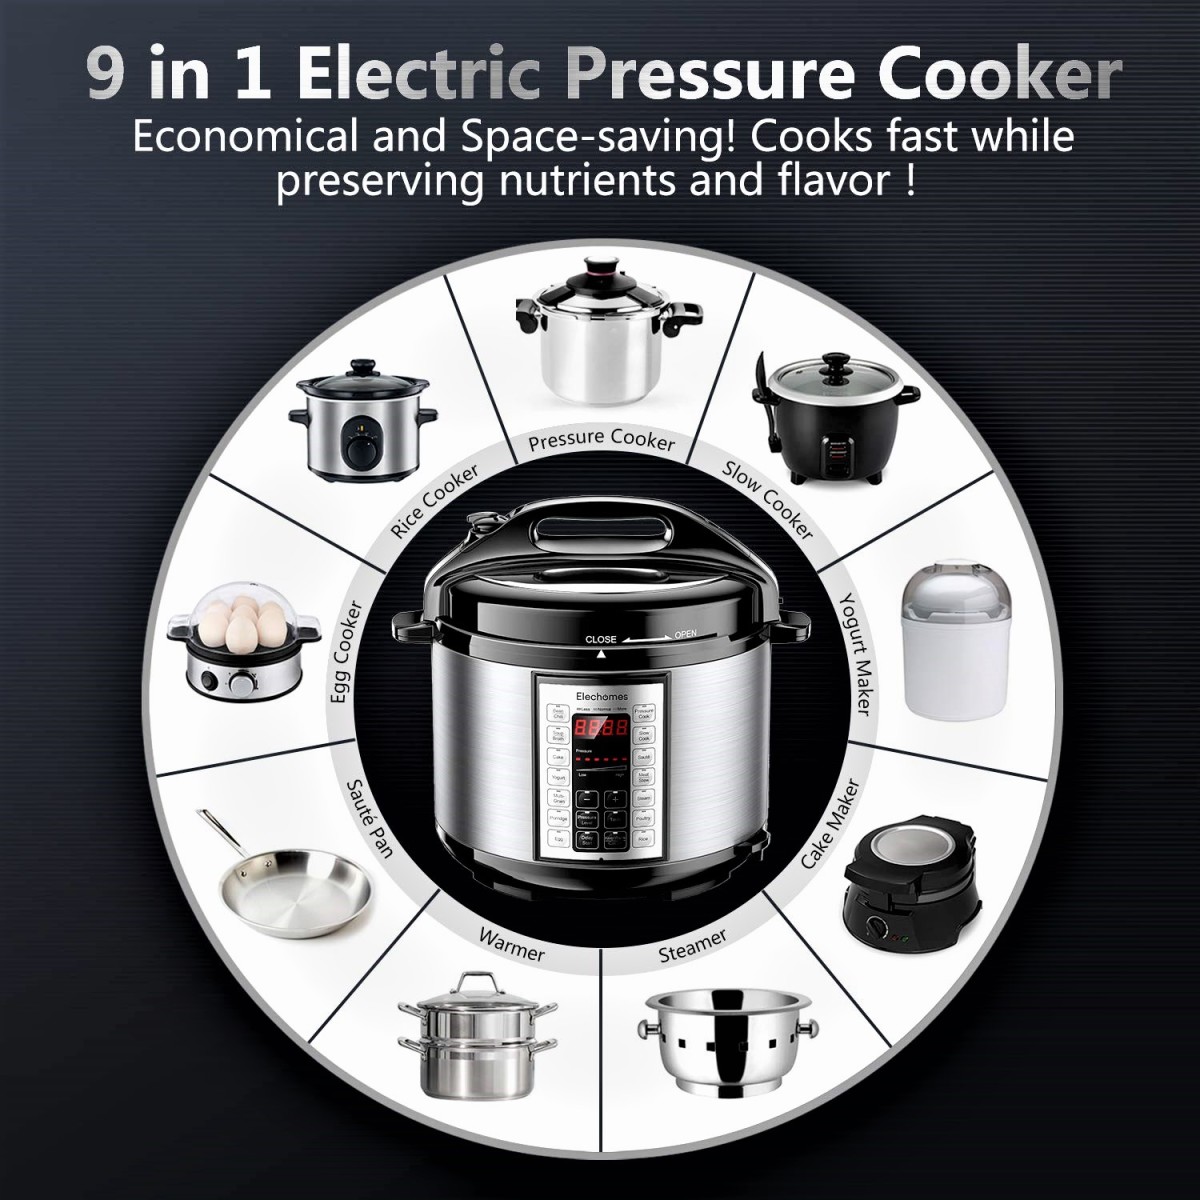 Features of the Cooker